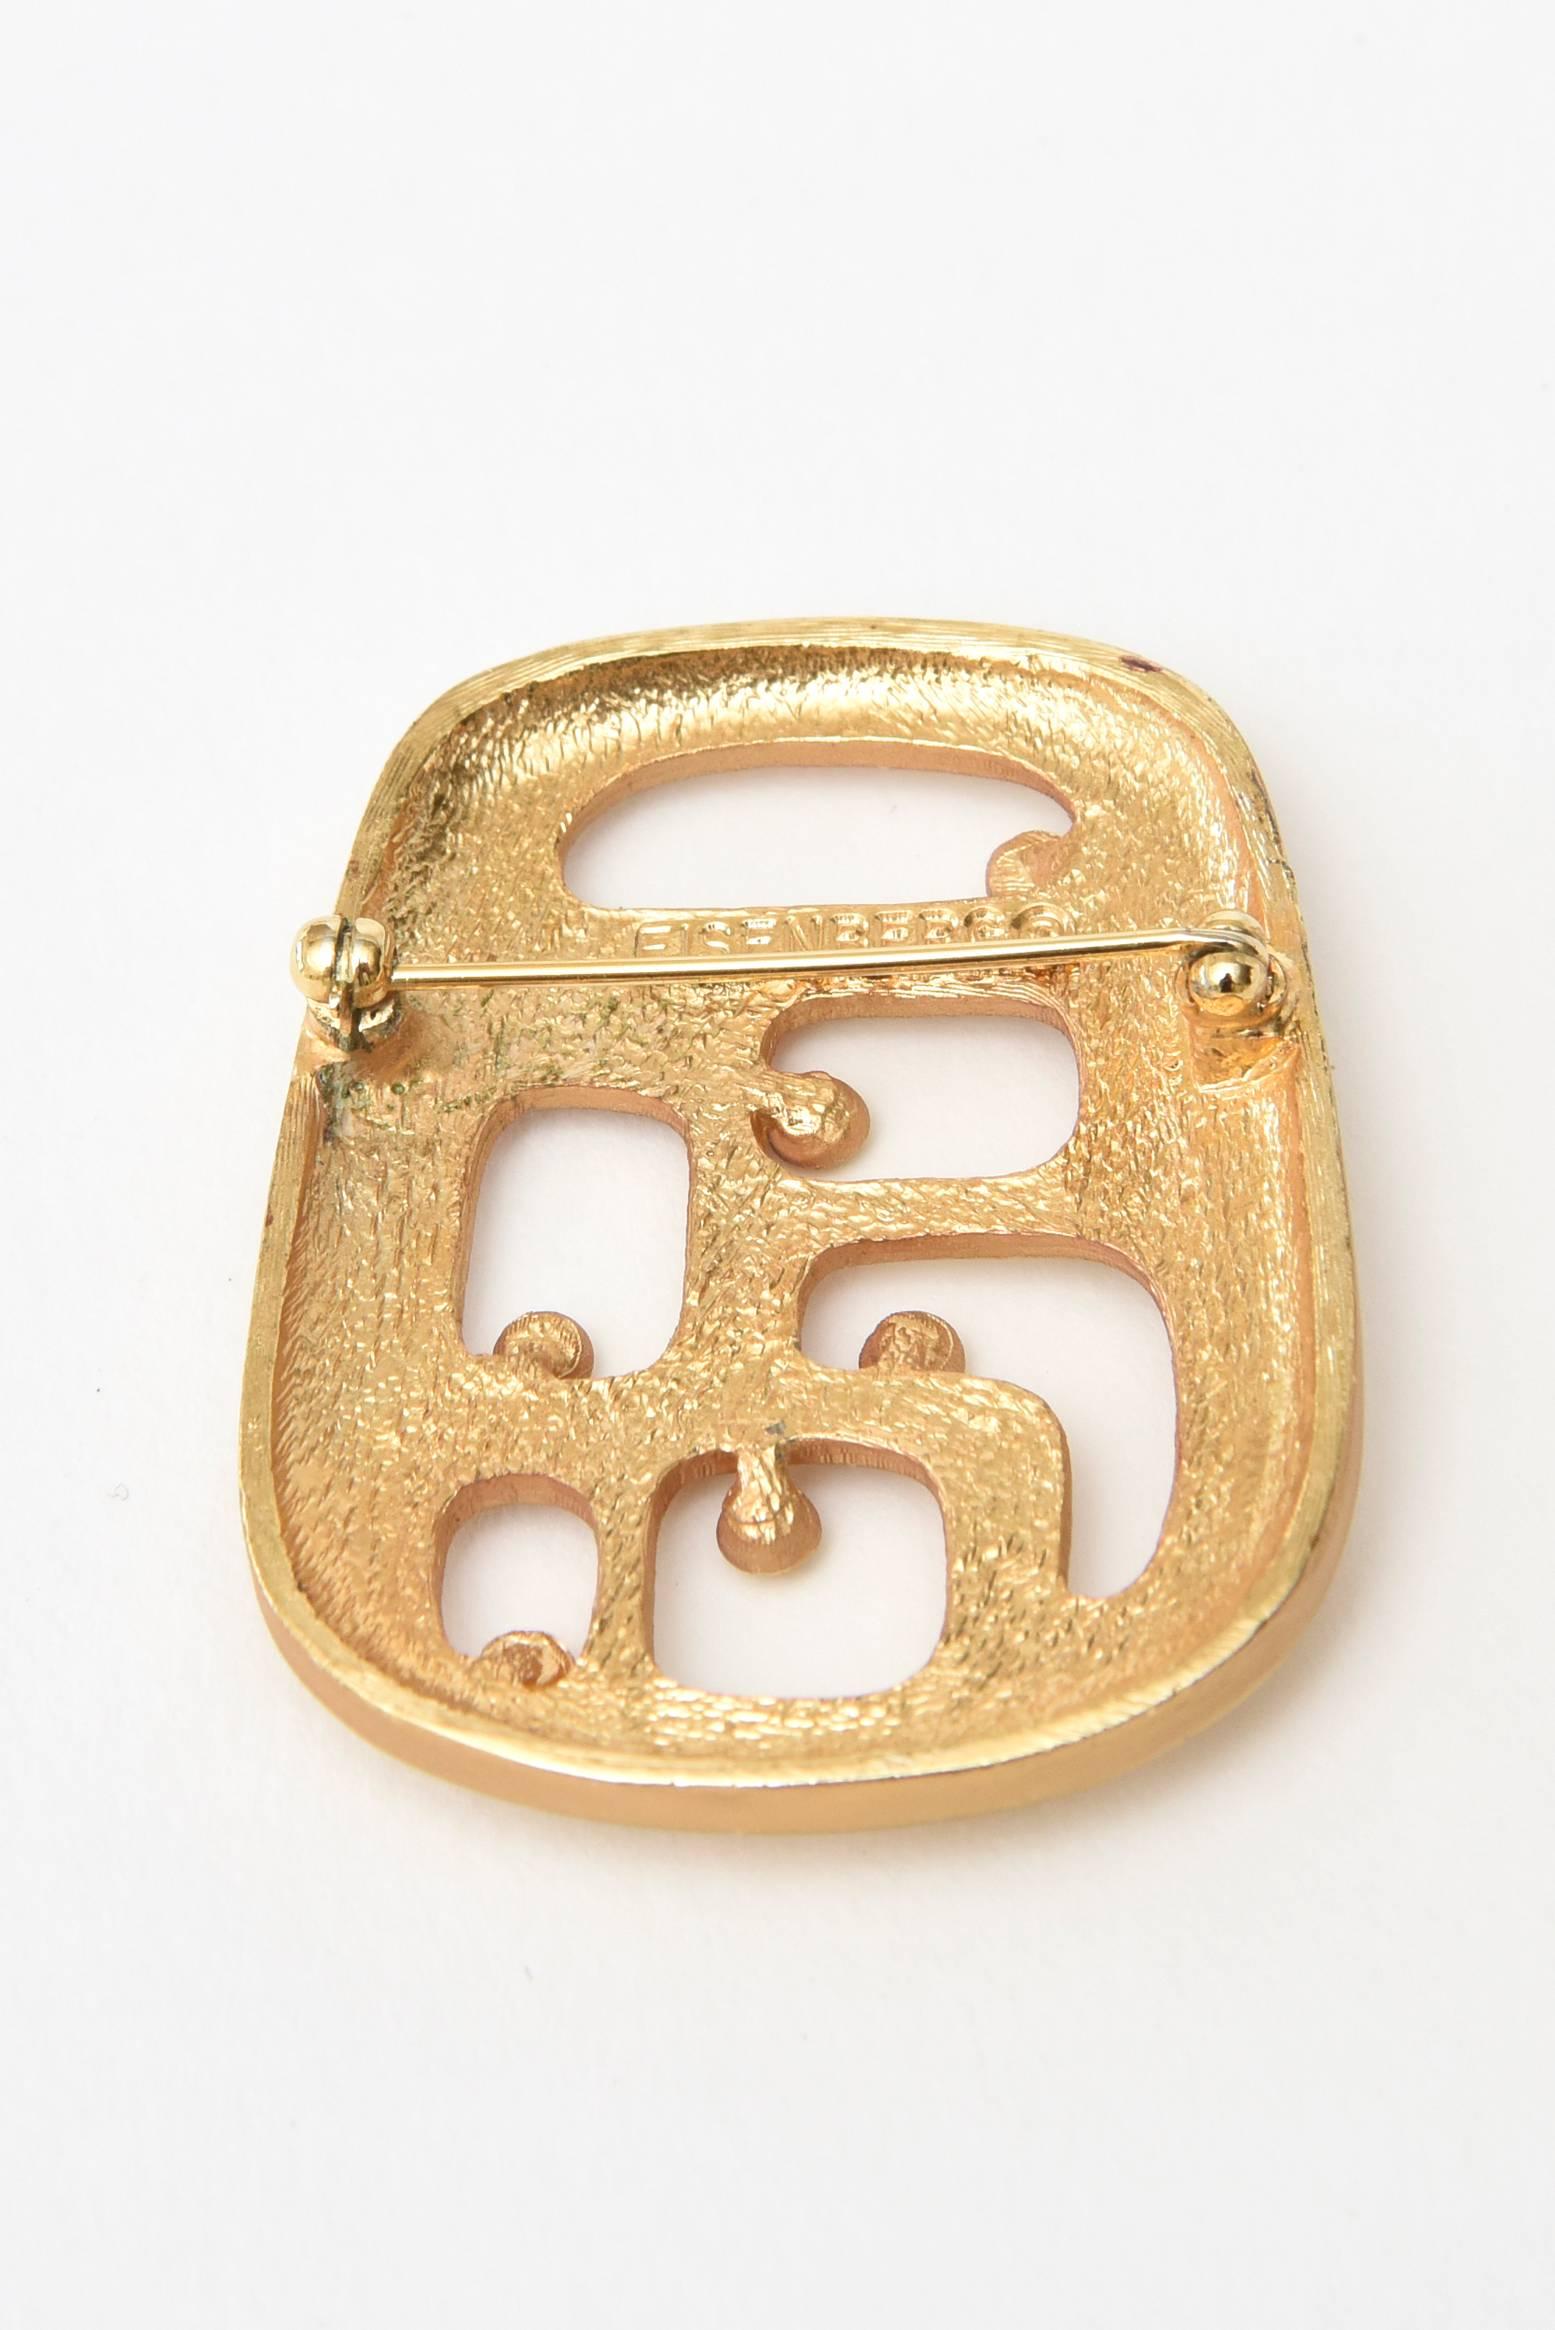 Eisenberg Gold Plated Modernist Abstract Pin Or Brooch In Good Condition For Sale In North Miami, FL